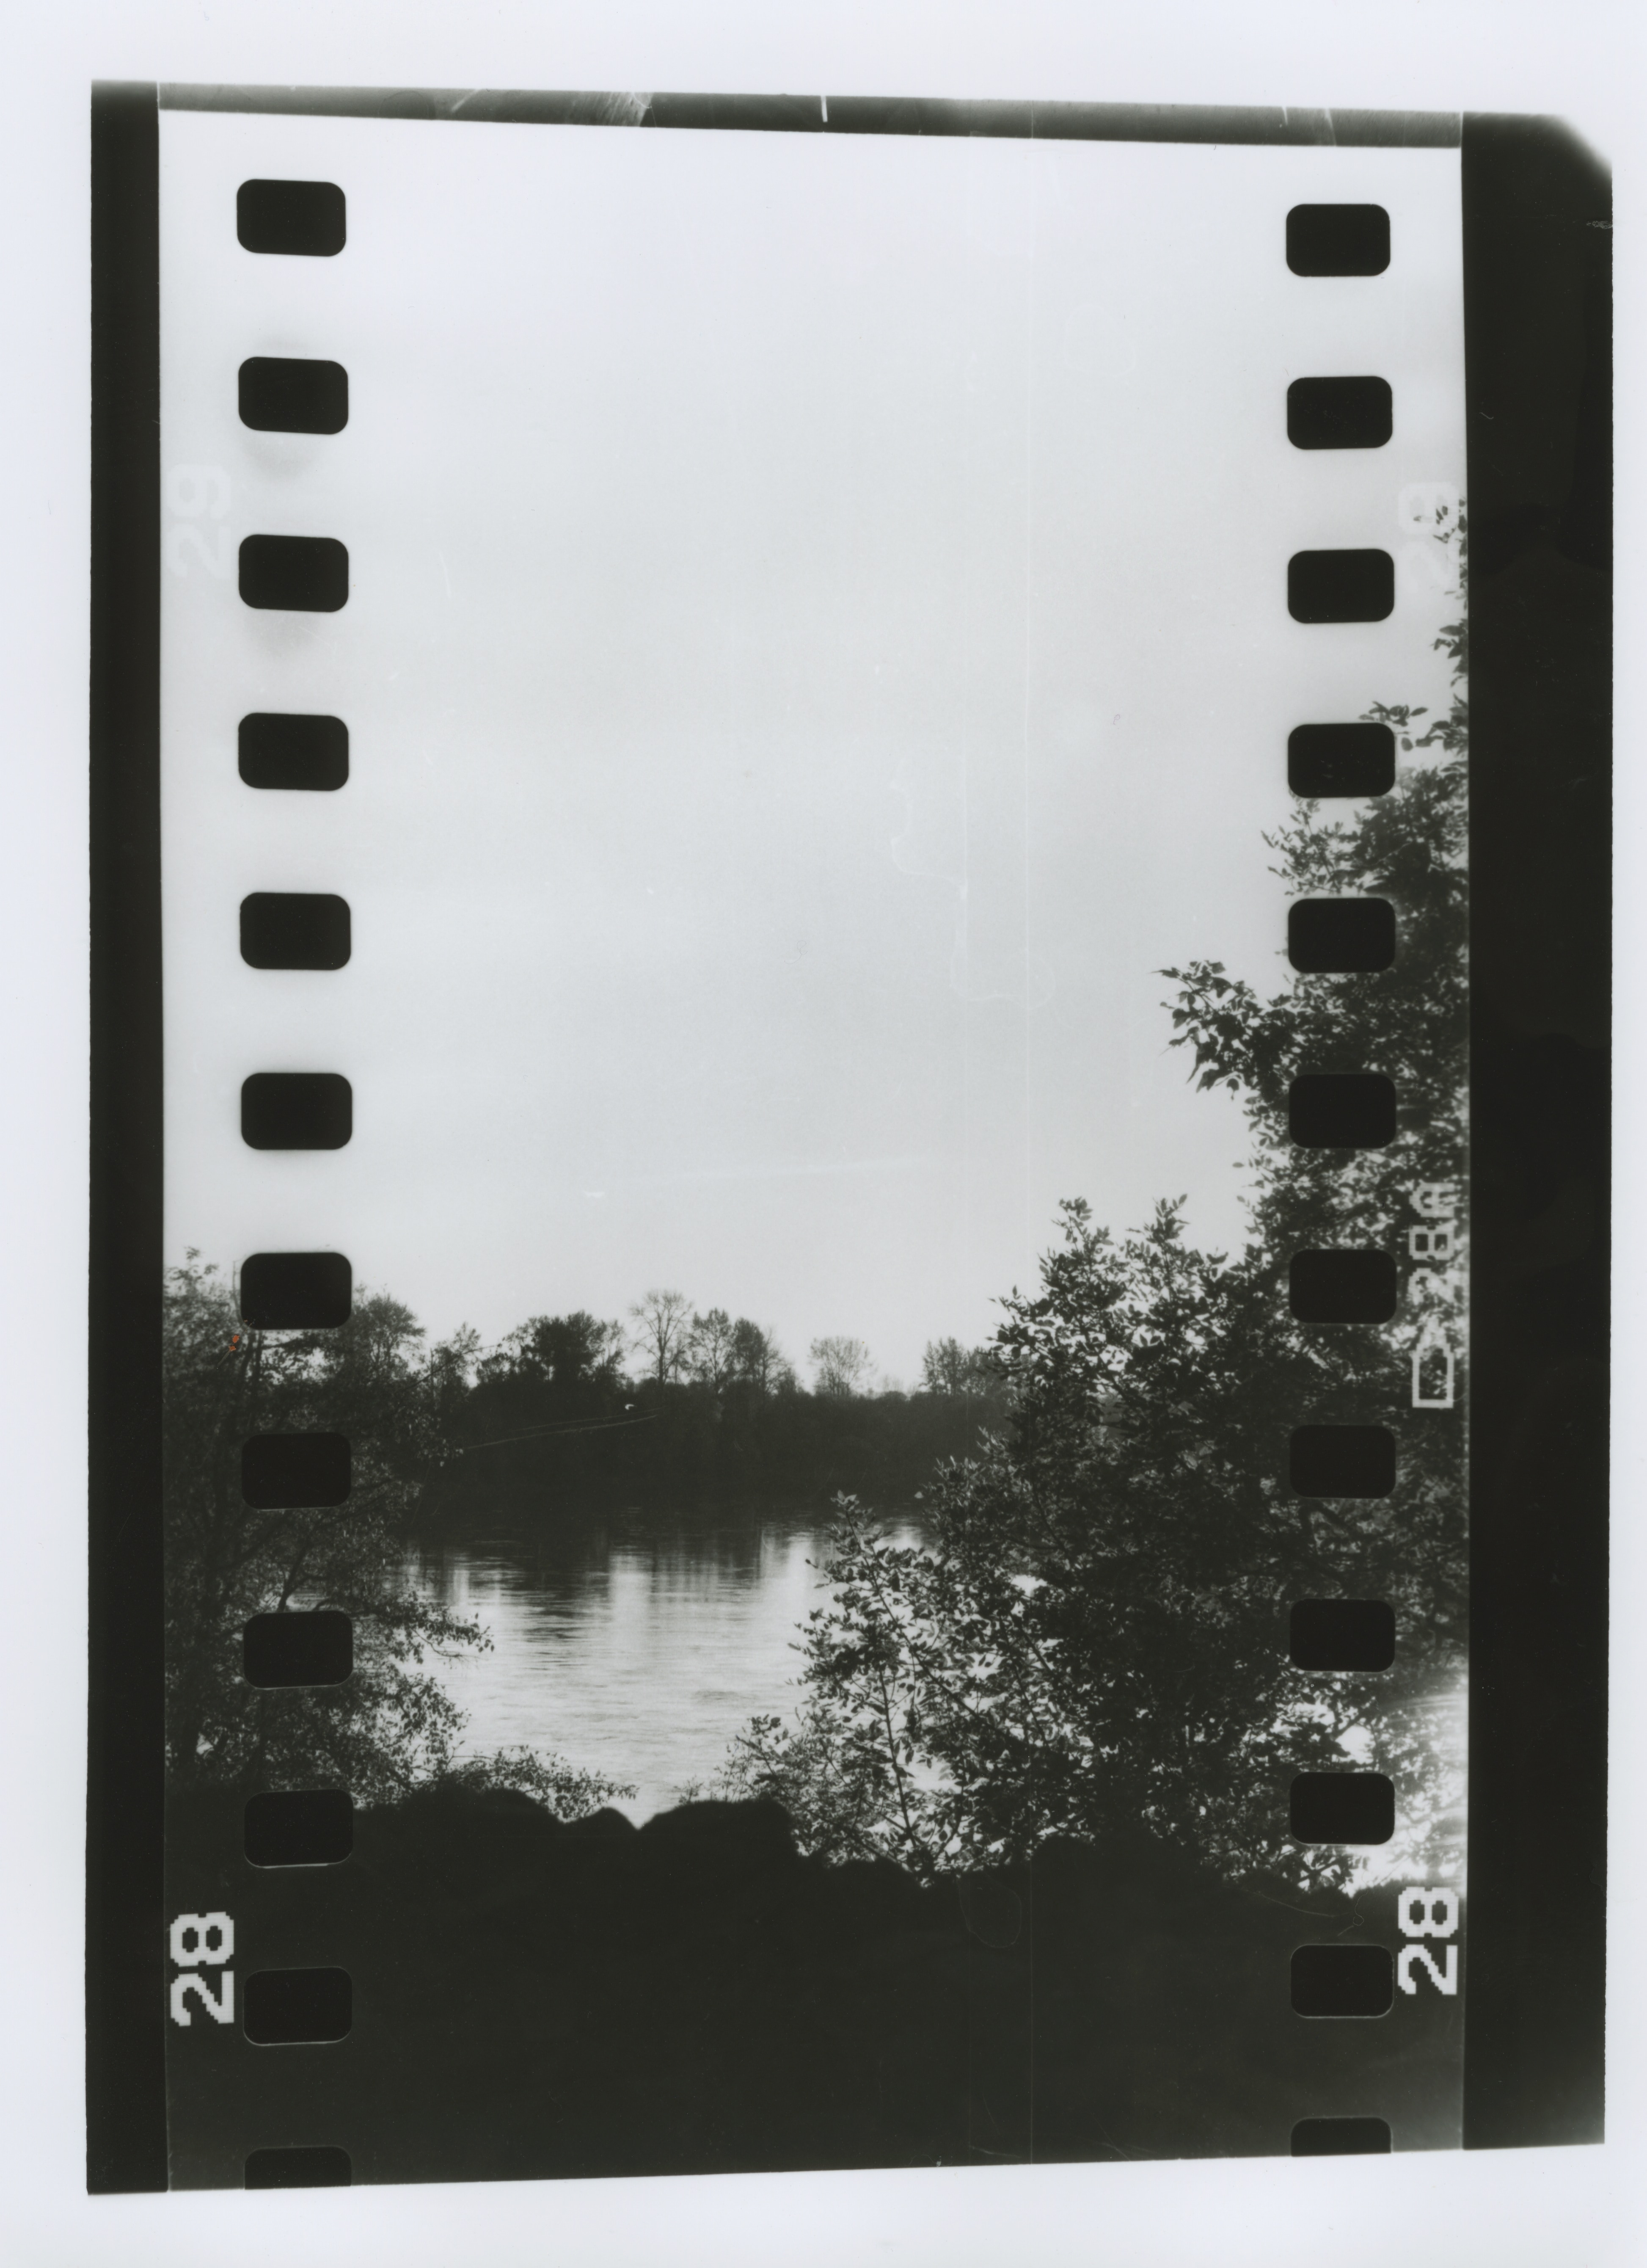 gray scale photography of trees near body of water